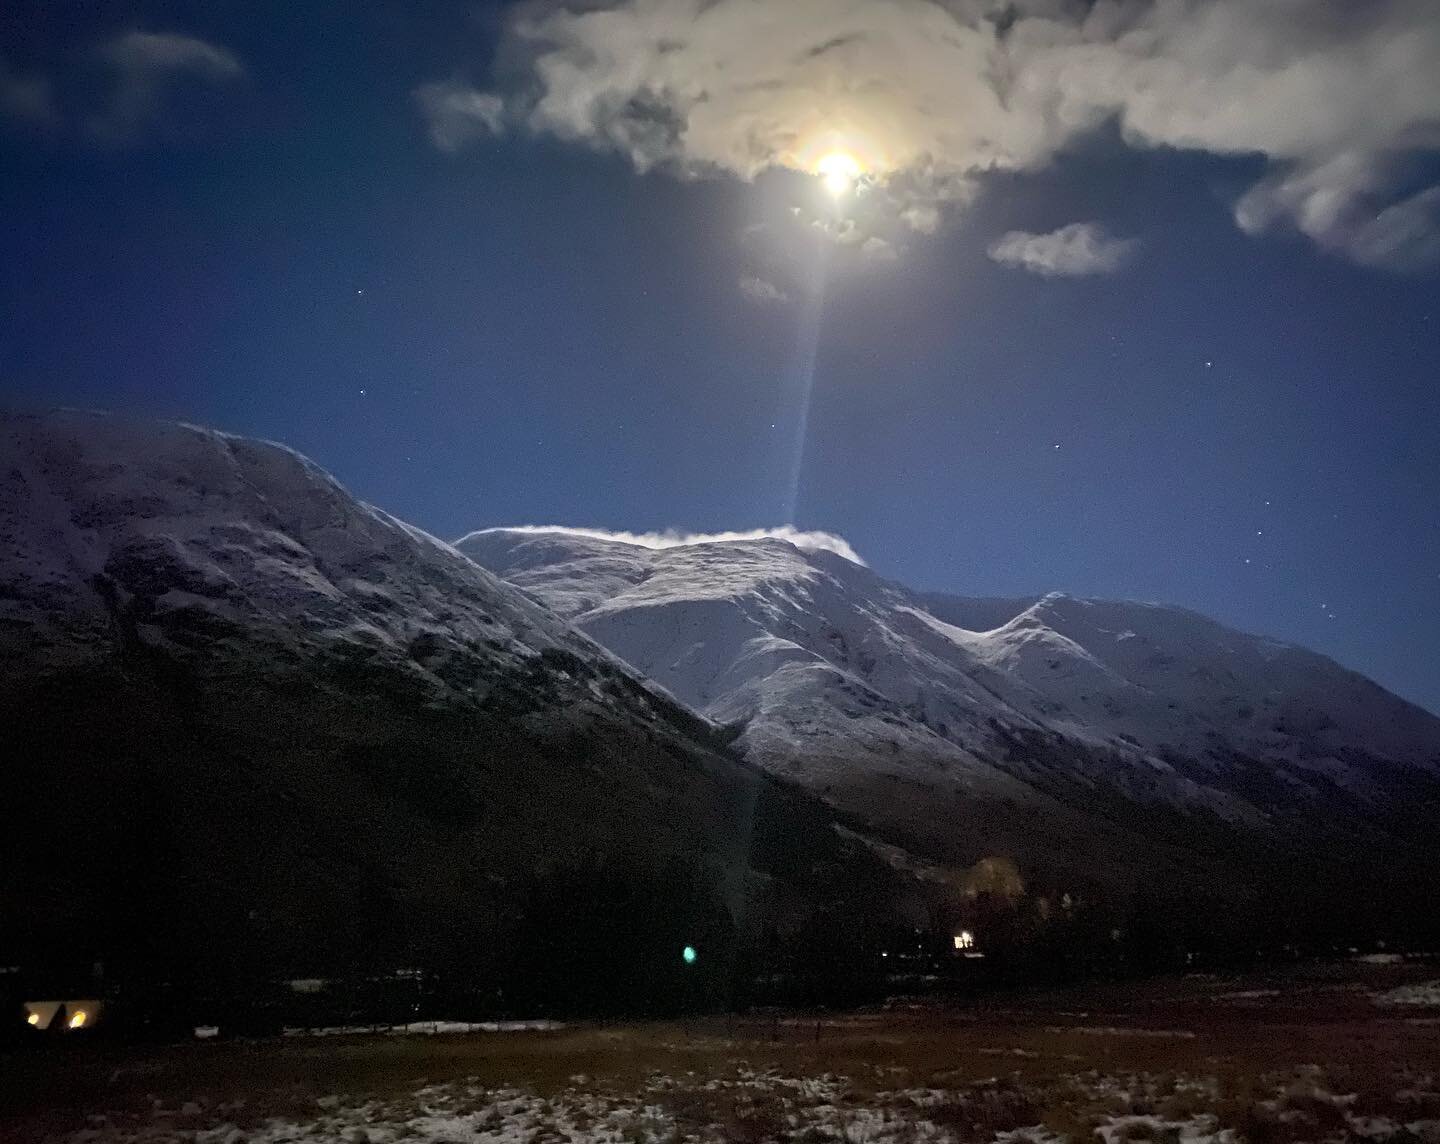 A snow-capped Ben Nevis illuminated by moonlight the other night. Magical.